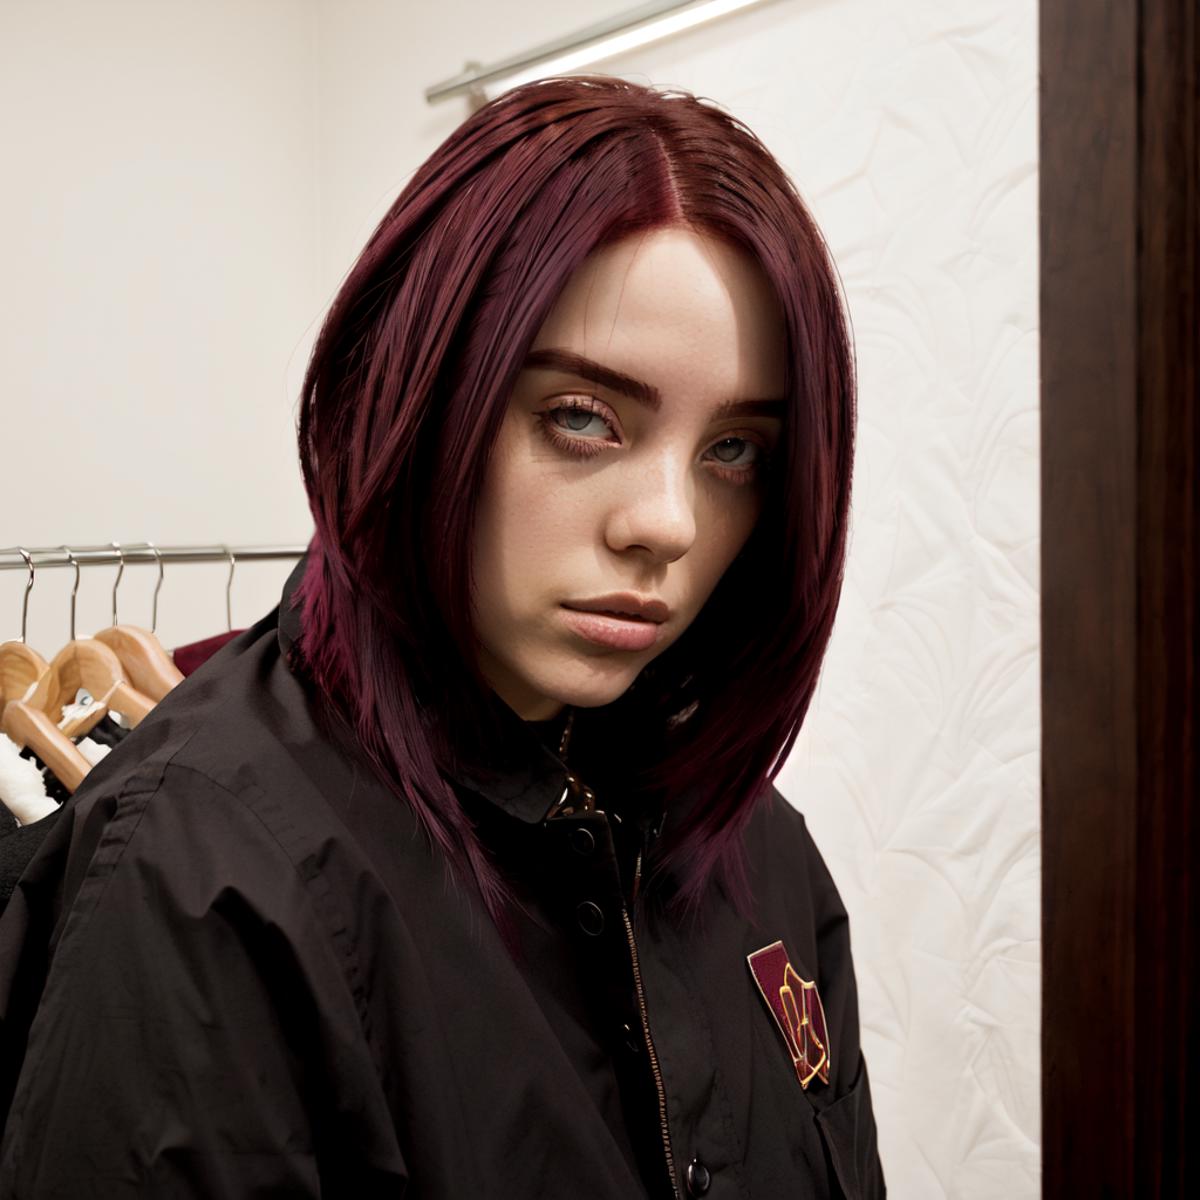 Billie Eilish image by i_dont_know_